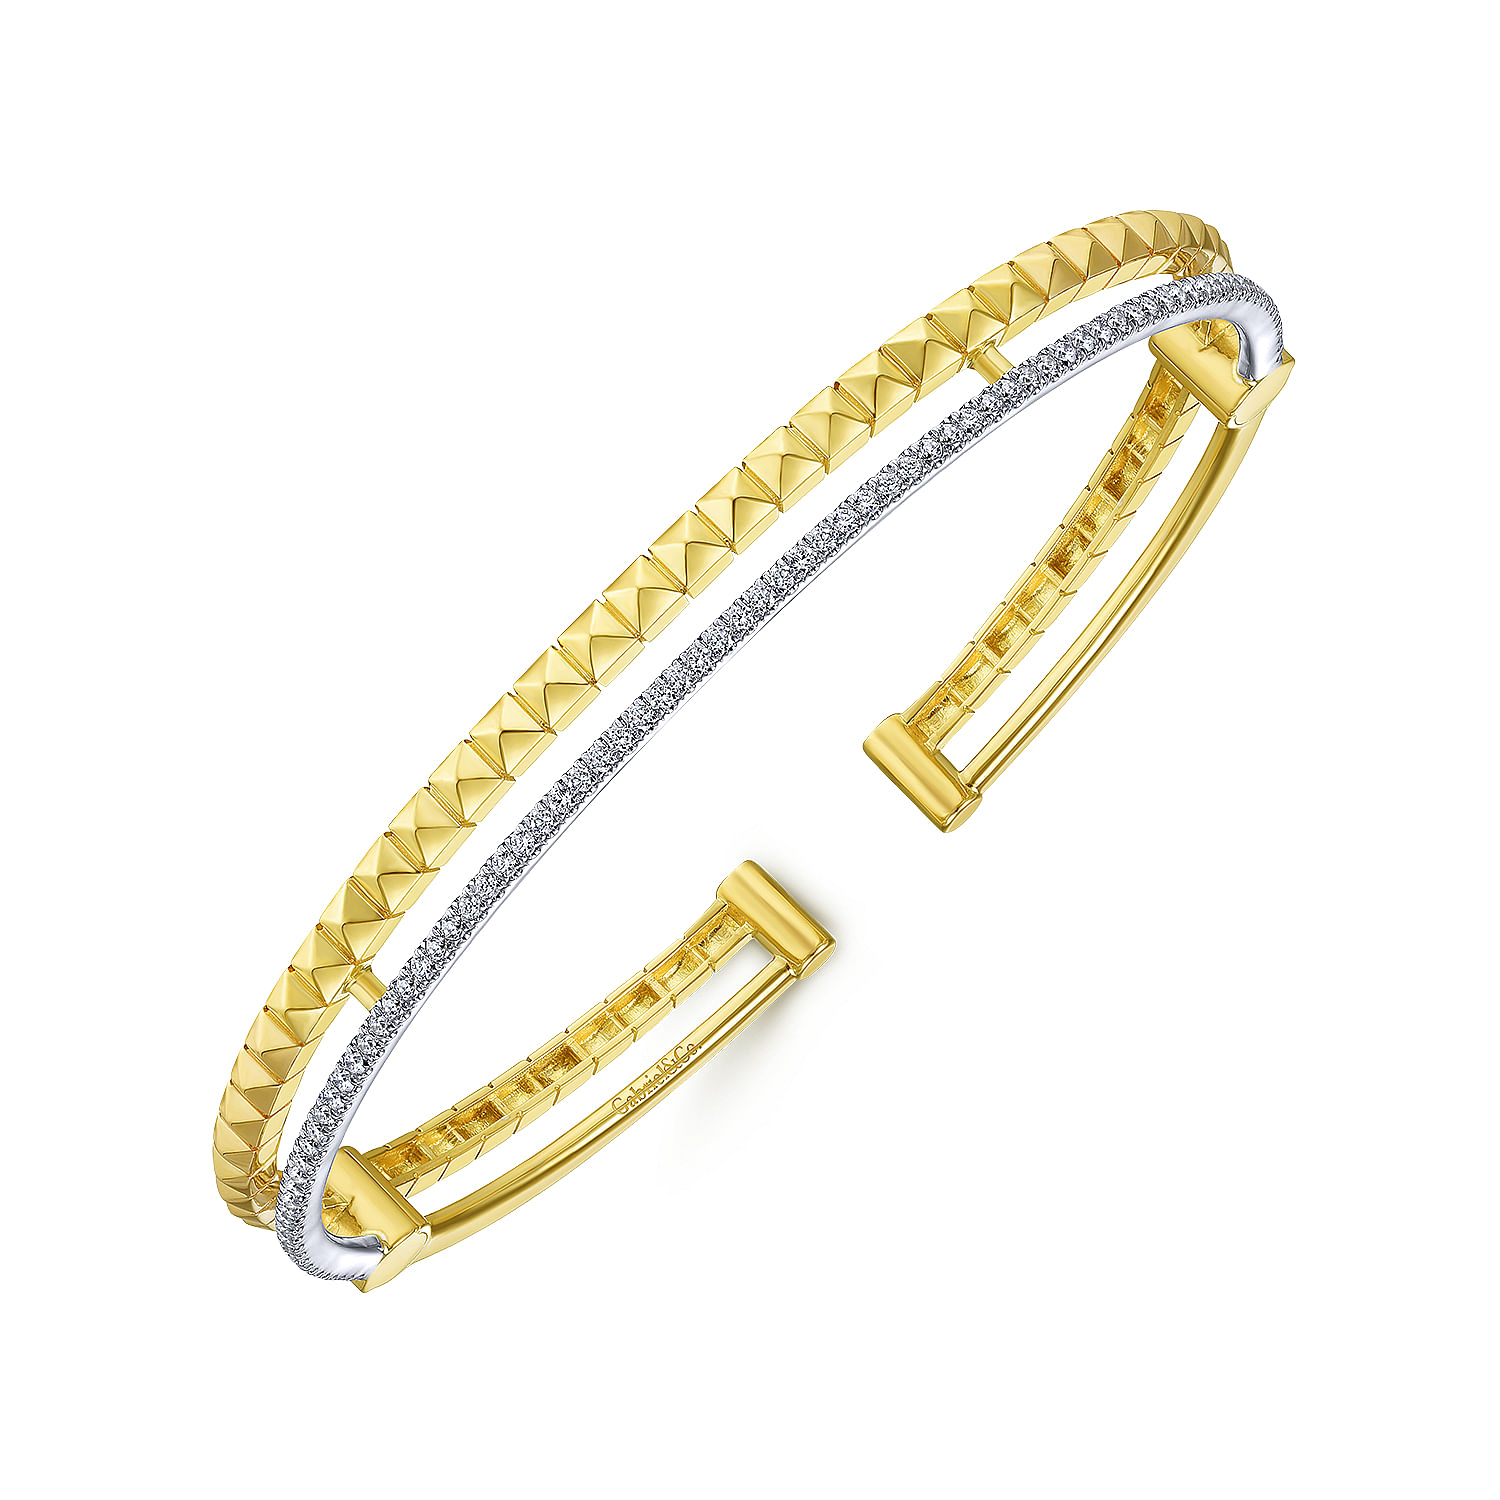 14K Yellow and White Gold Split Cuff with Pyramids and Diamonds